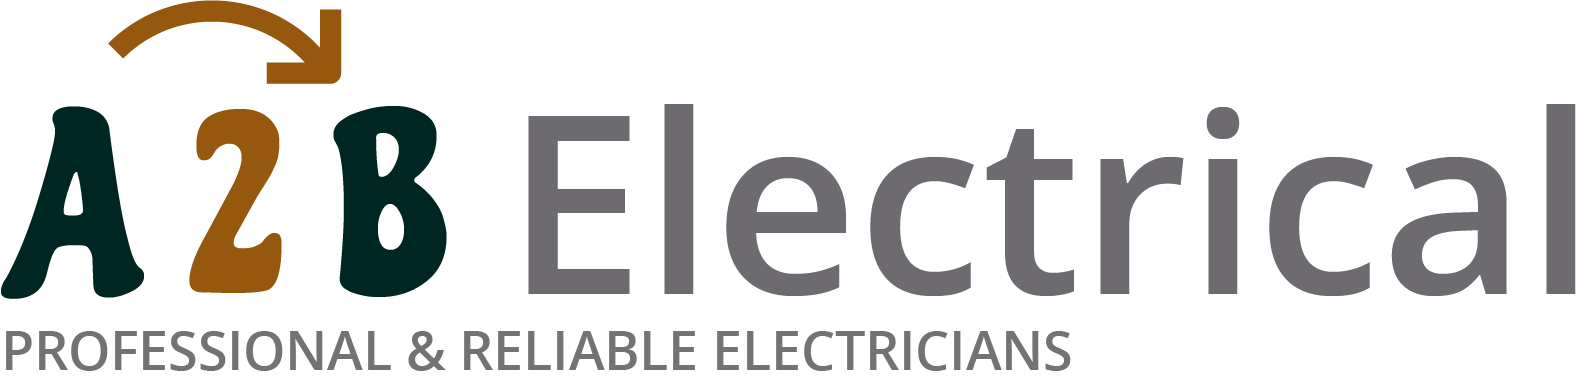 If you have electrical wiring problems in Potters Bar, we can provide an electrician to have a look for you. 